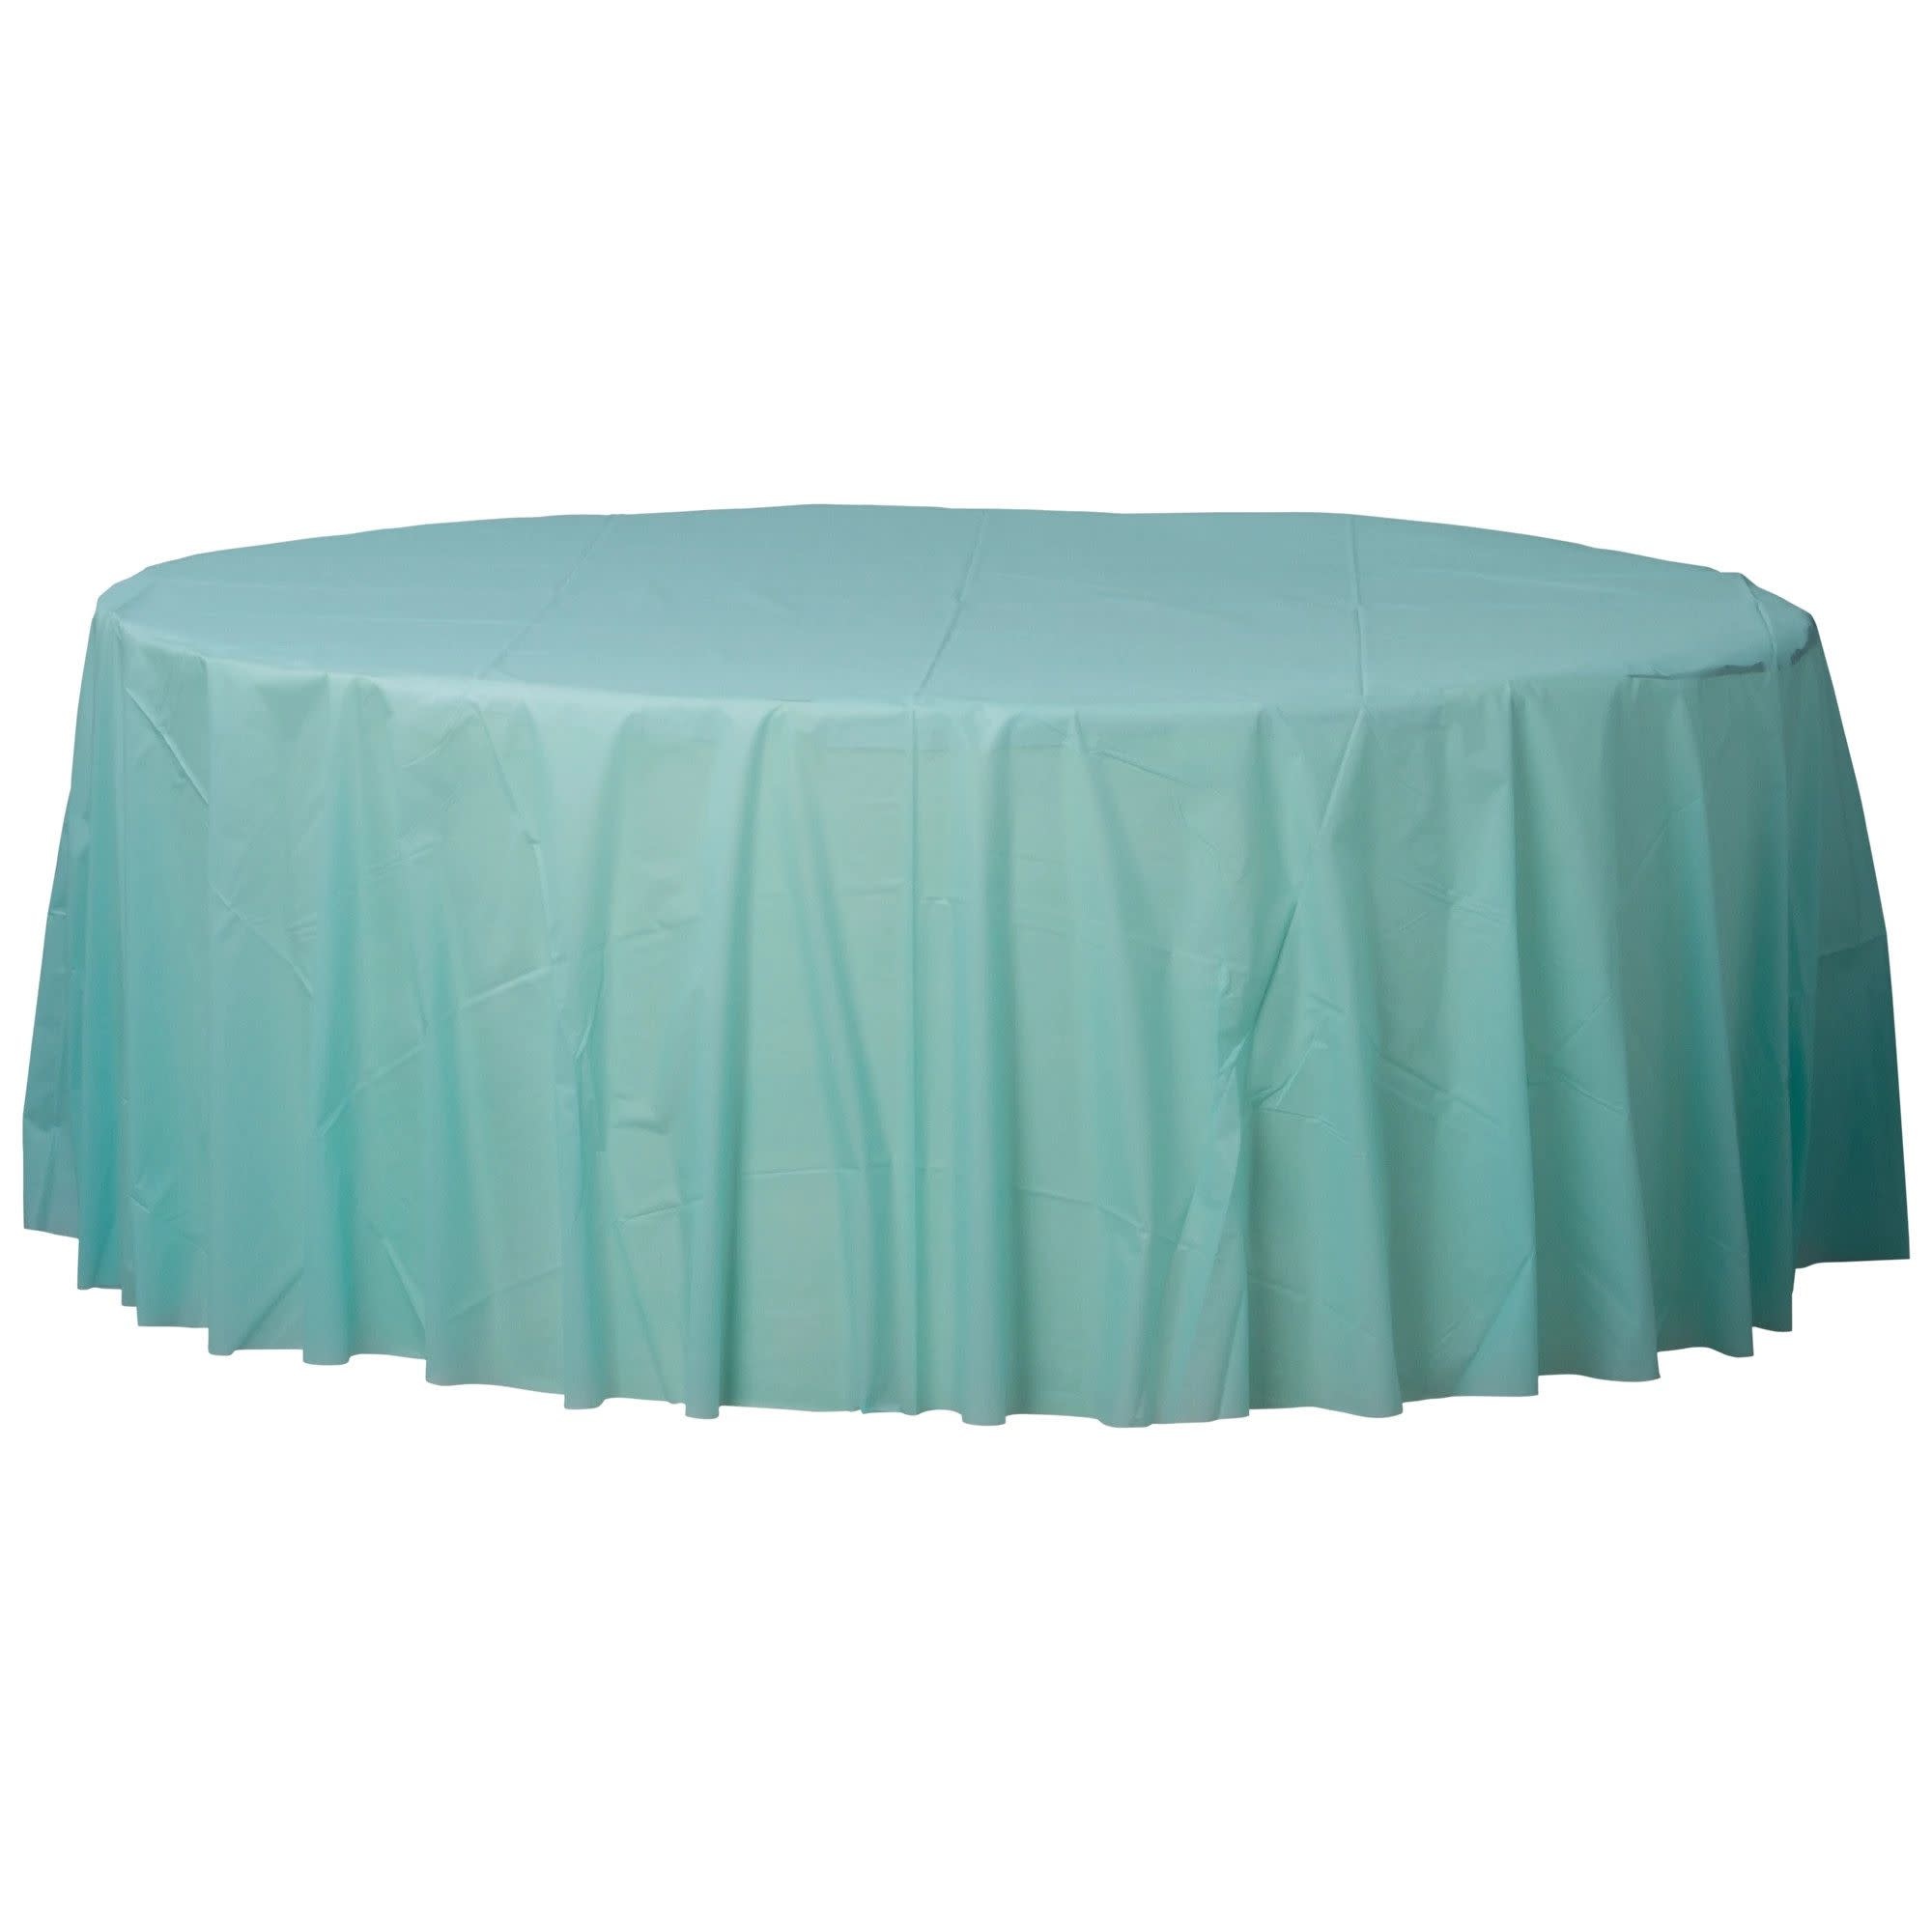 84" Round Plastic Table Cover - Robin's-Egg Blue